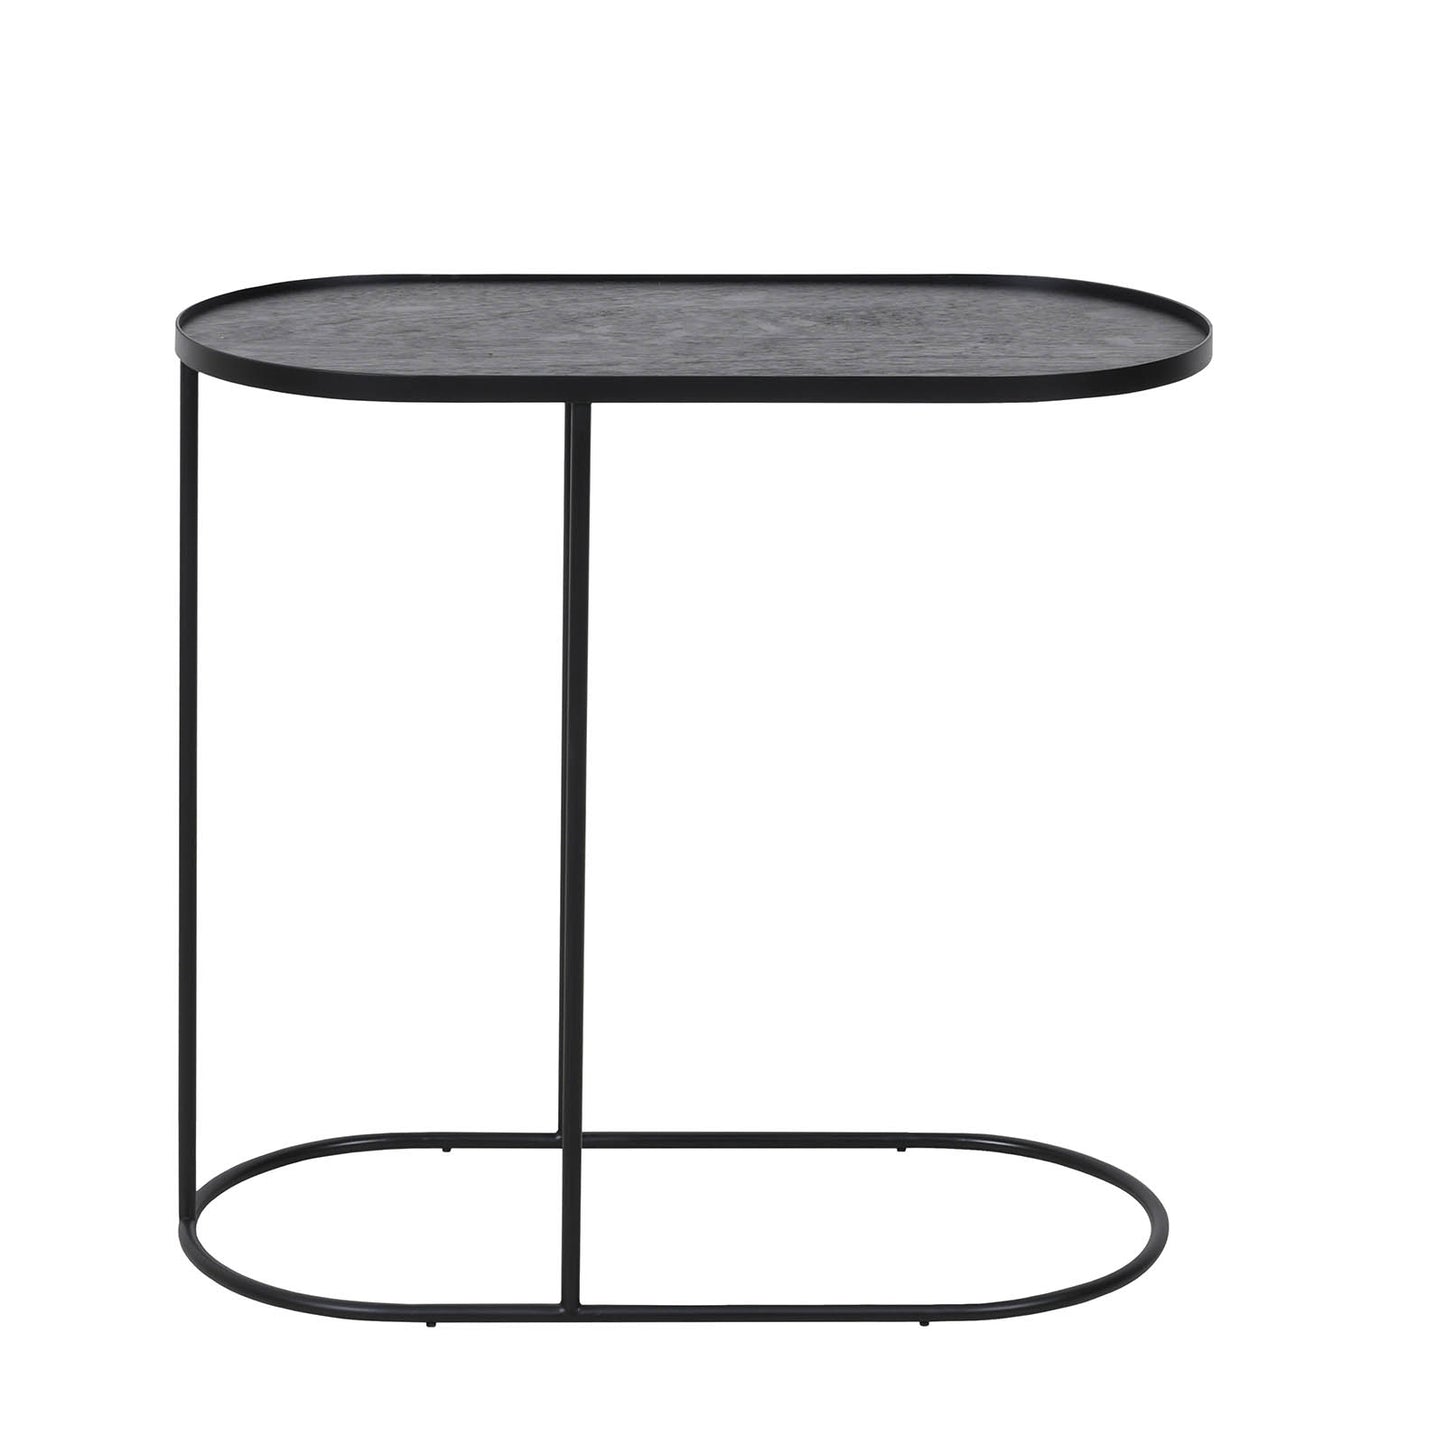 Oblong tray side table (tray not included)